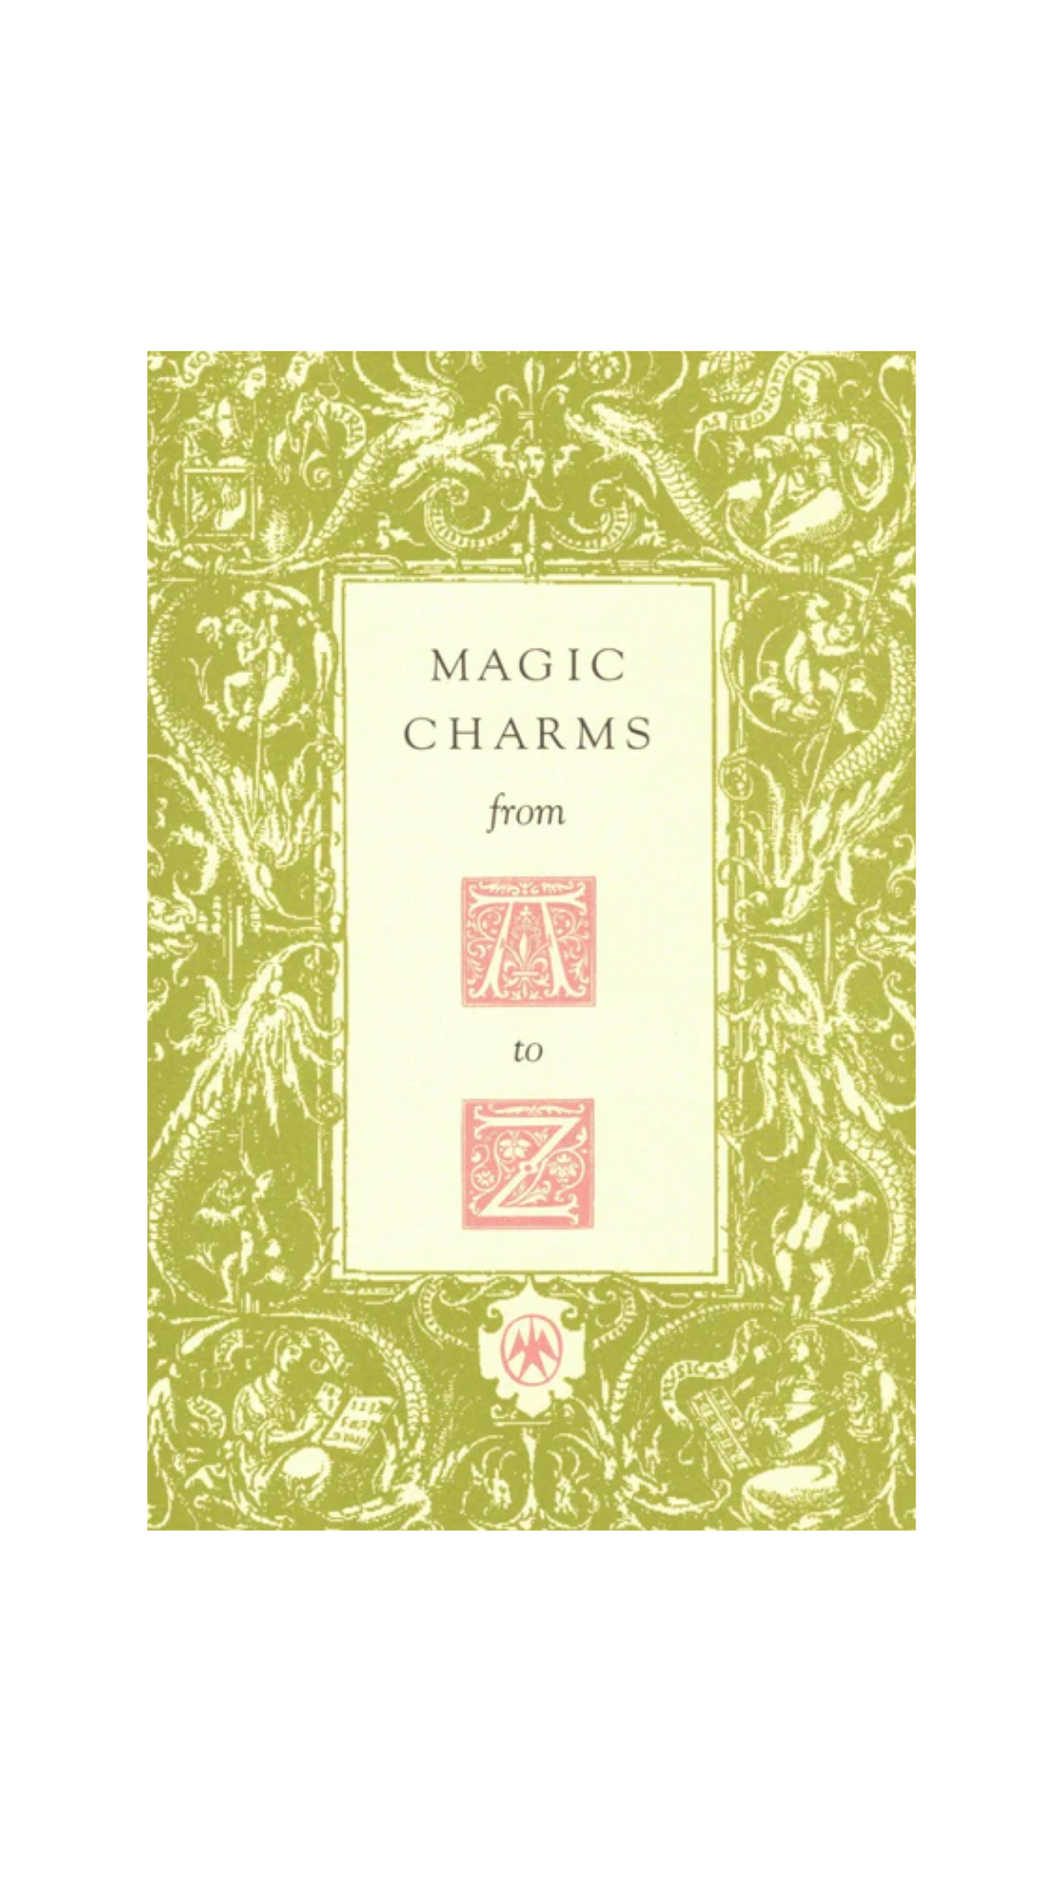 Magic Charms A to Z by Elizabeth Pepper